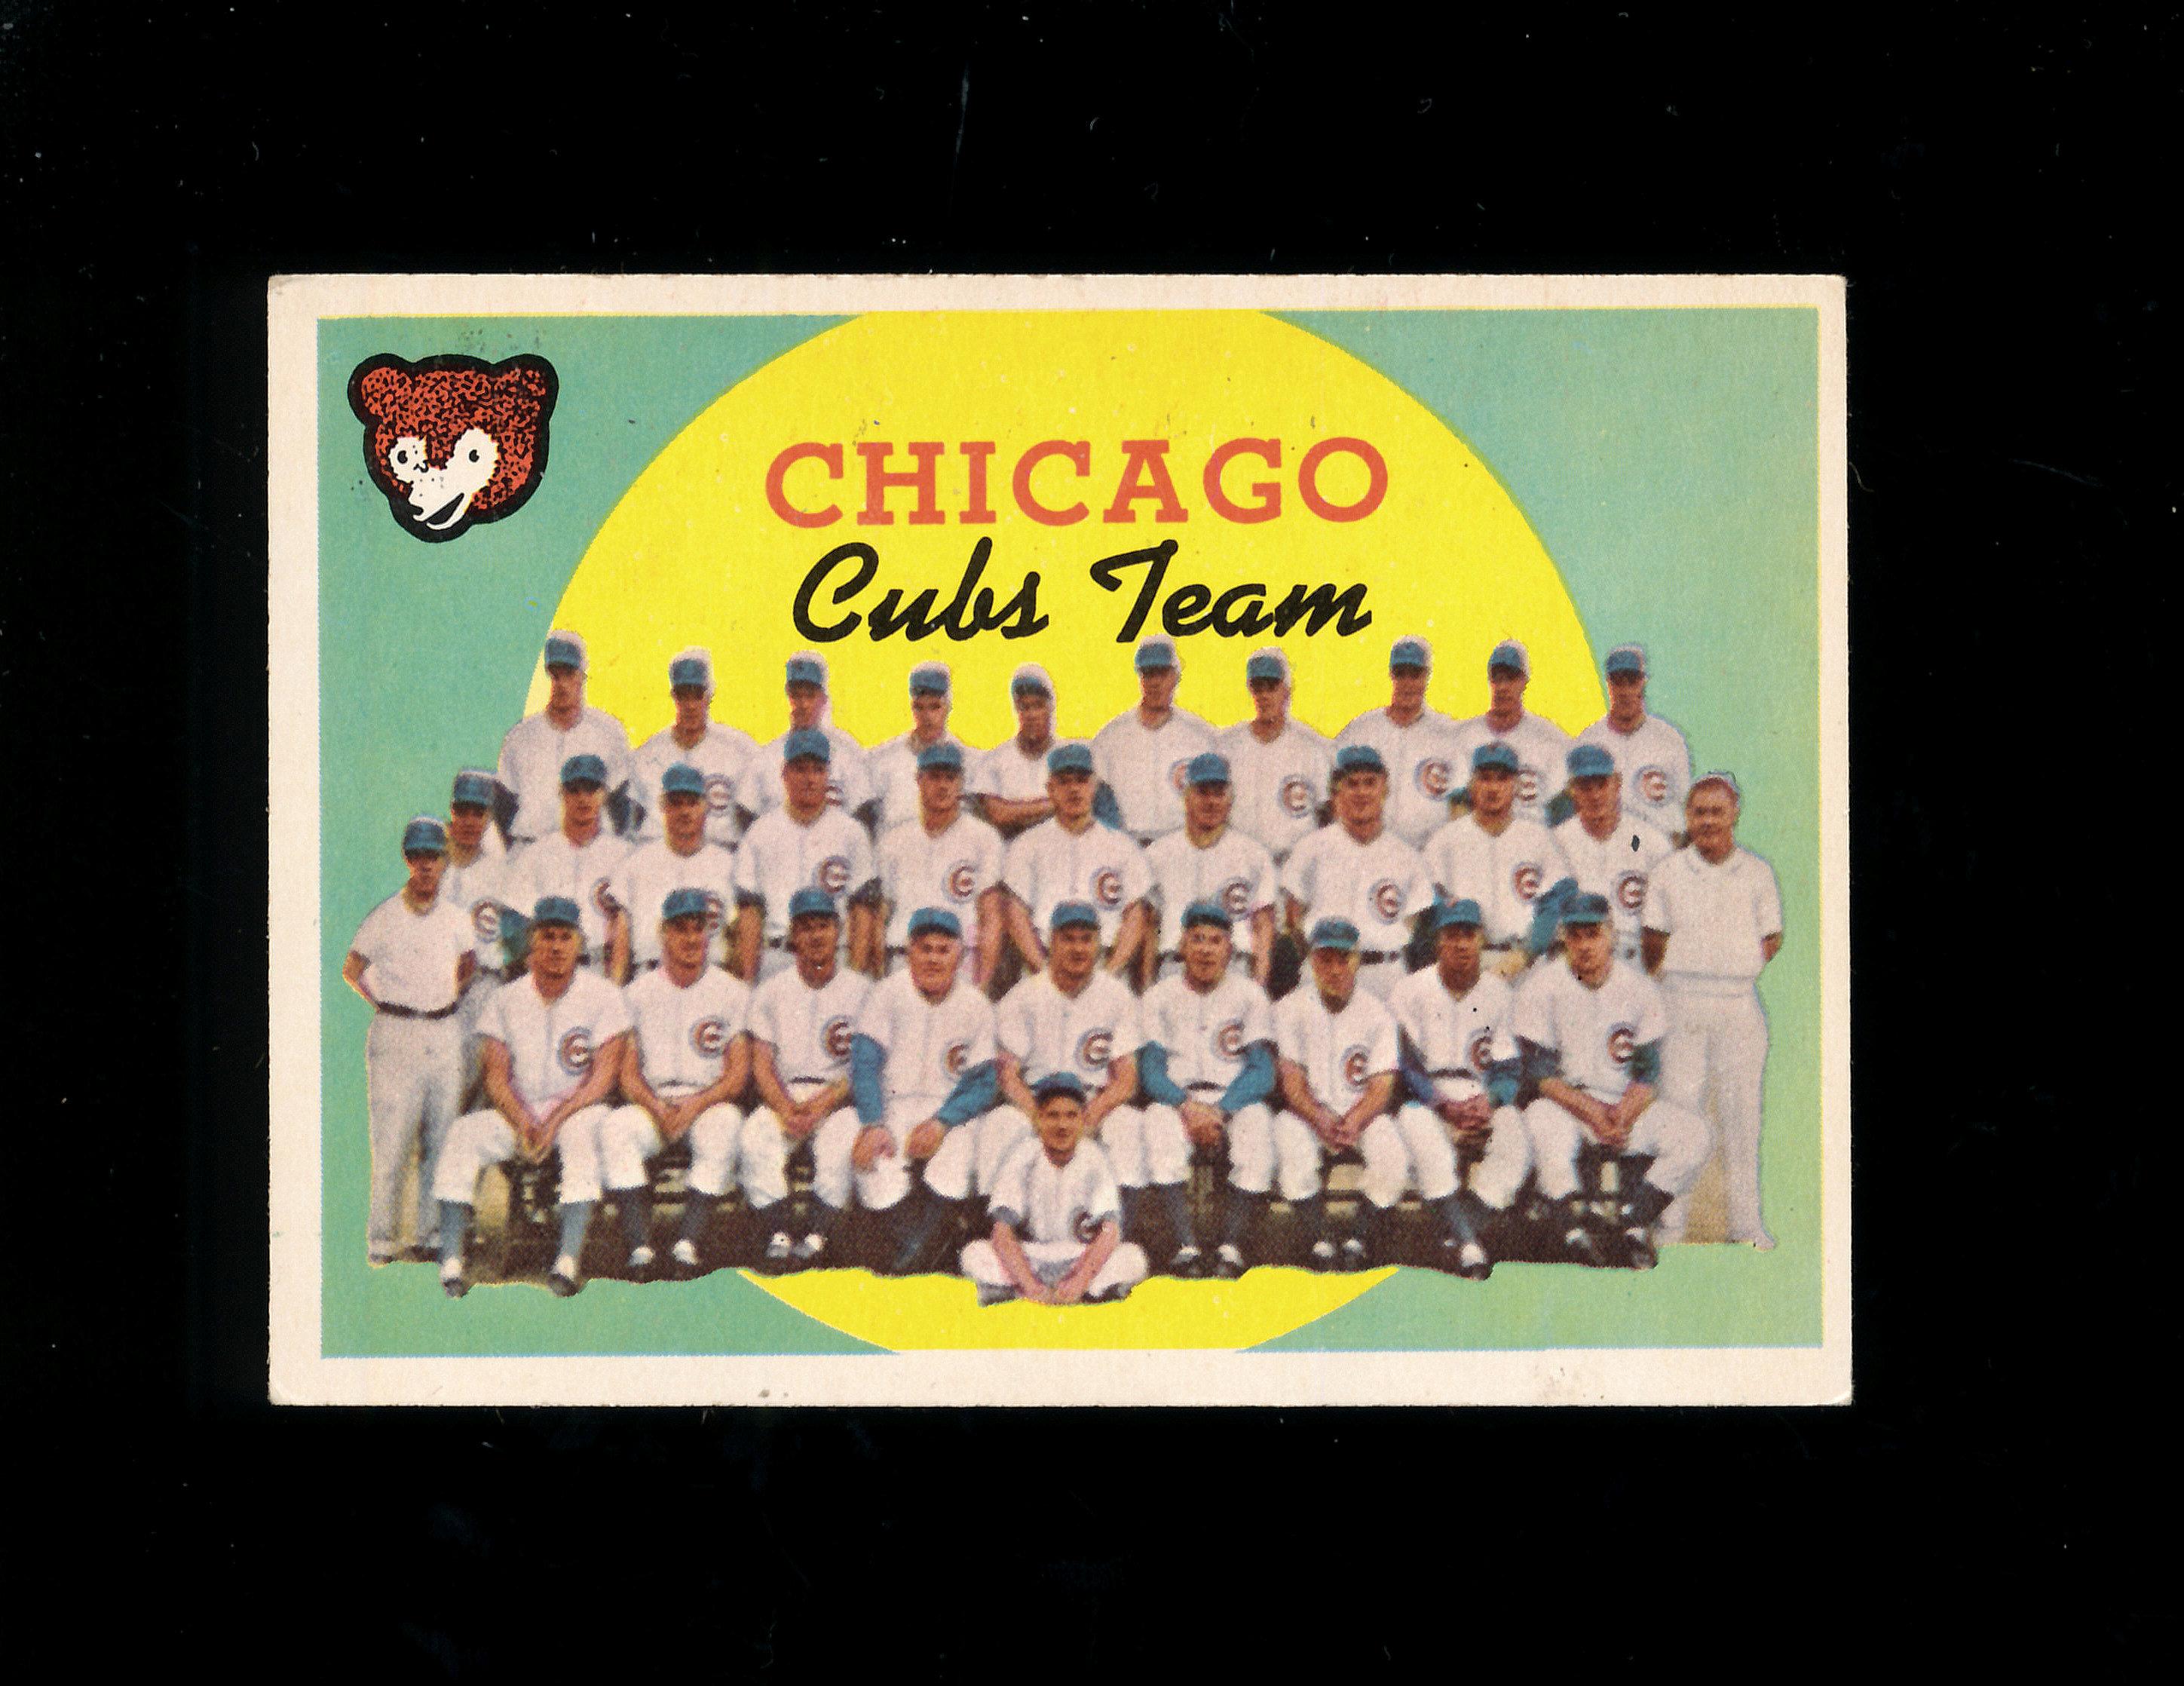 1959 Topps Baseball Card #304 CheckList/Chicago Cubs Team. EX to EX-MT Cond